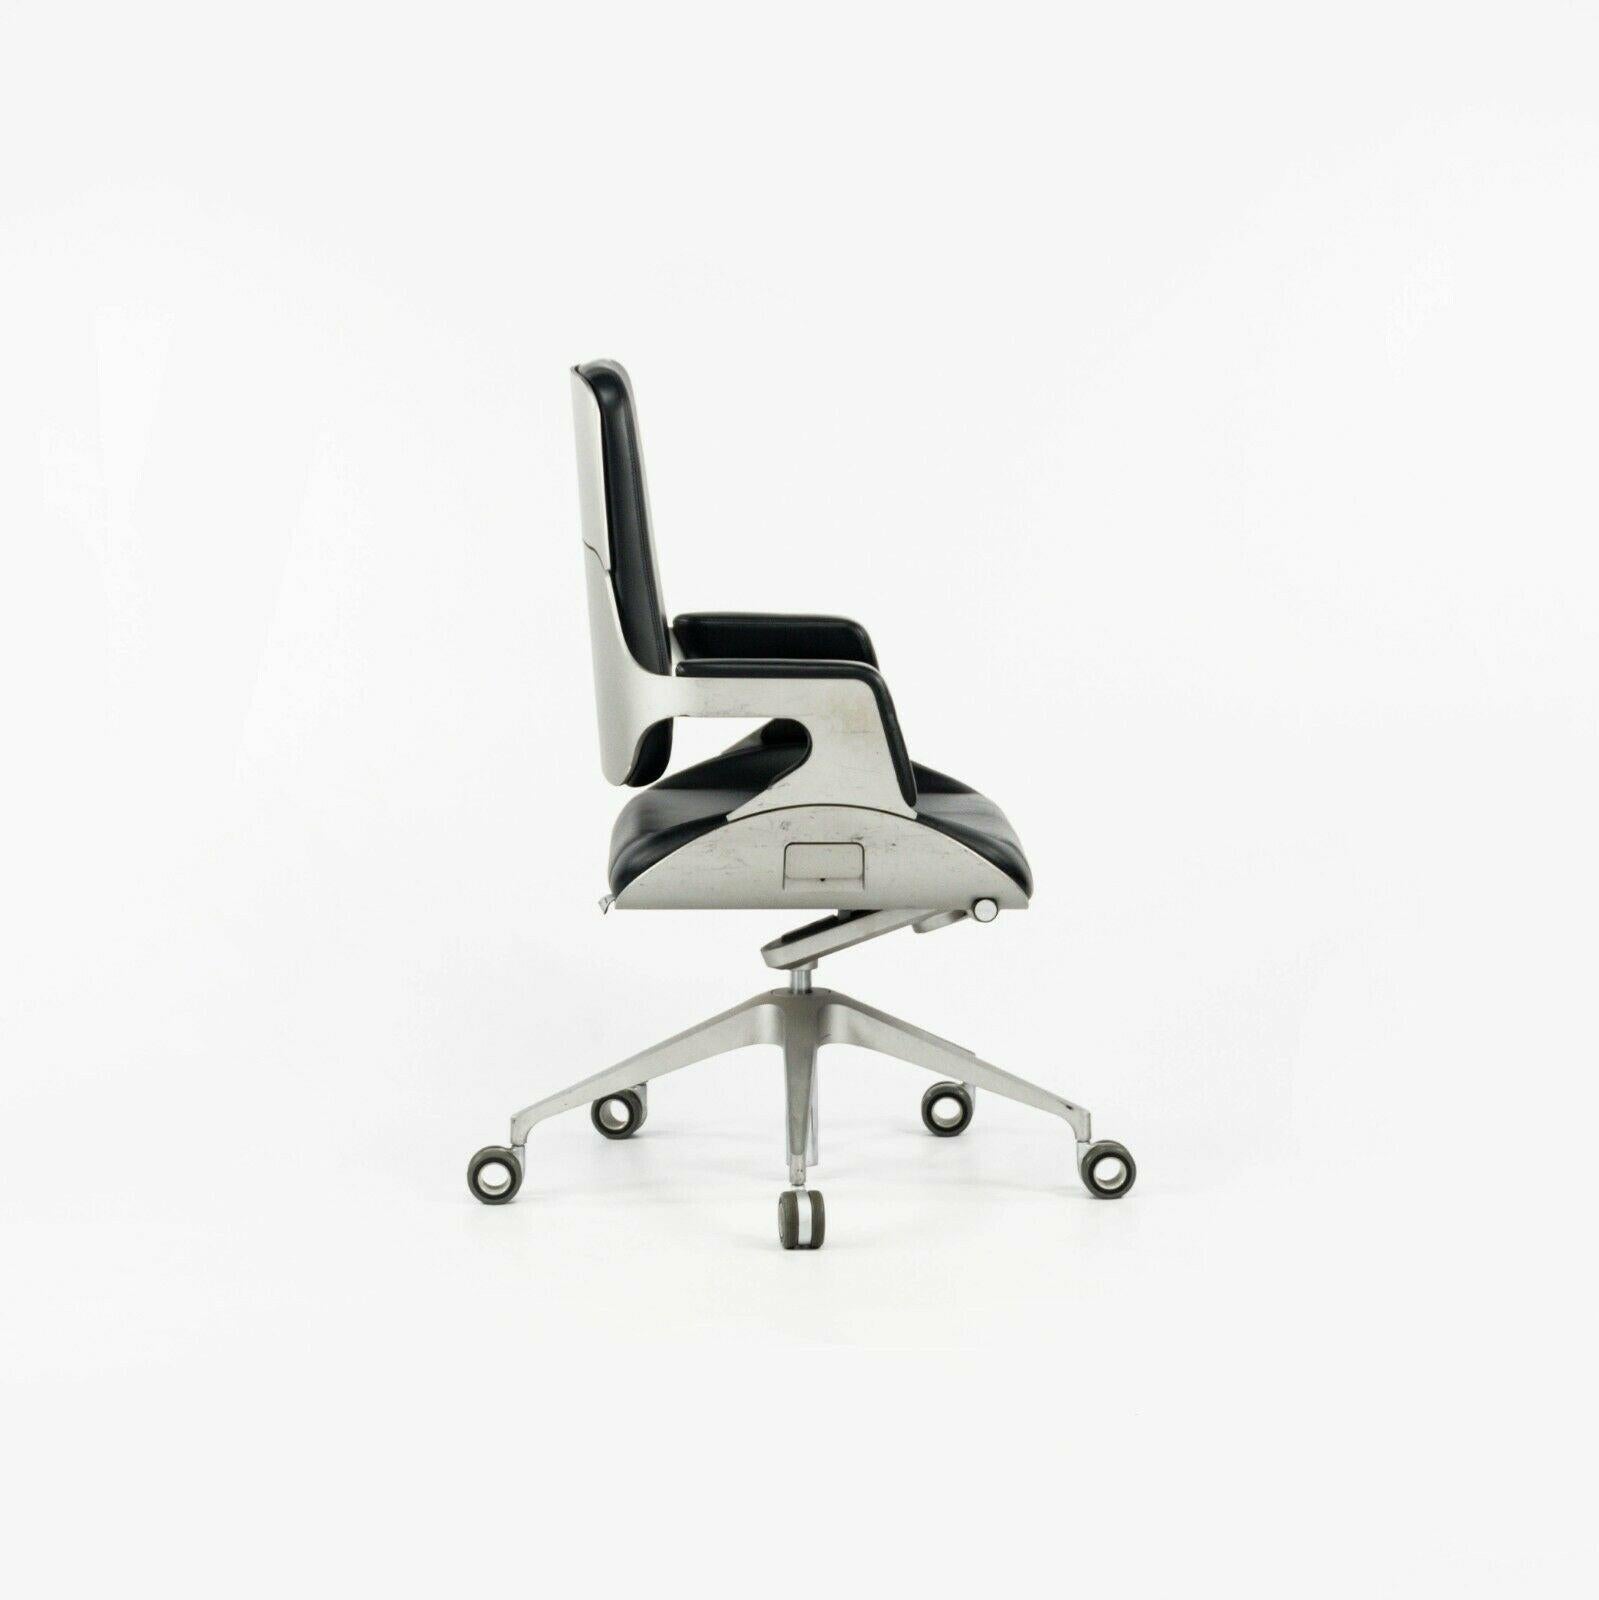 Listed for sale is a single (multiple chairs are available but the listing price is only for one) 2008 production Silver 262S desk chair, designed by Hadi Teherani, produced by Interstuhl in Germany. This is a remarkably unique chair, which